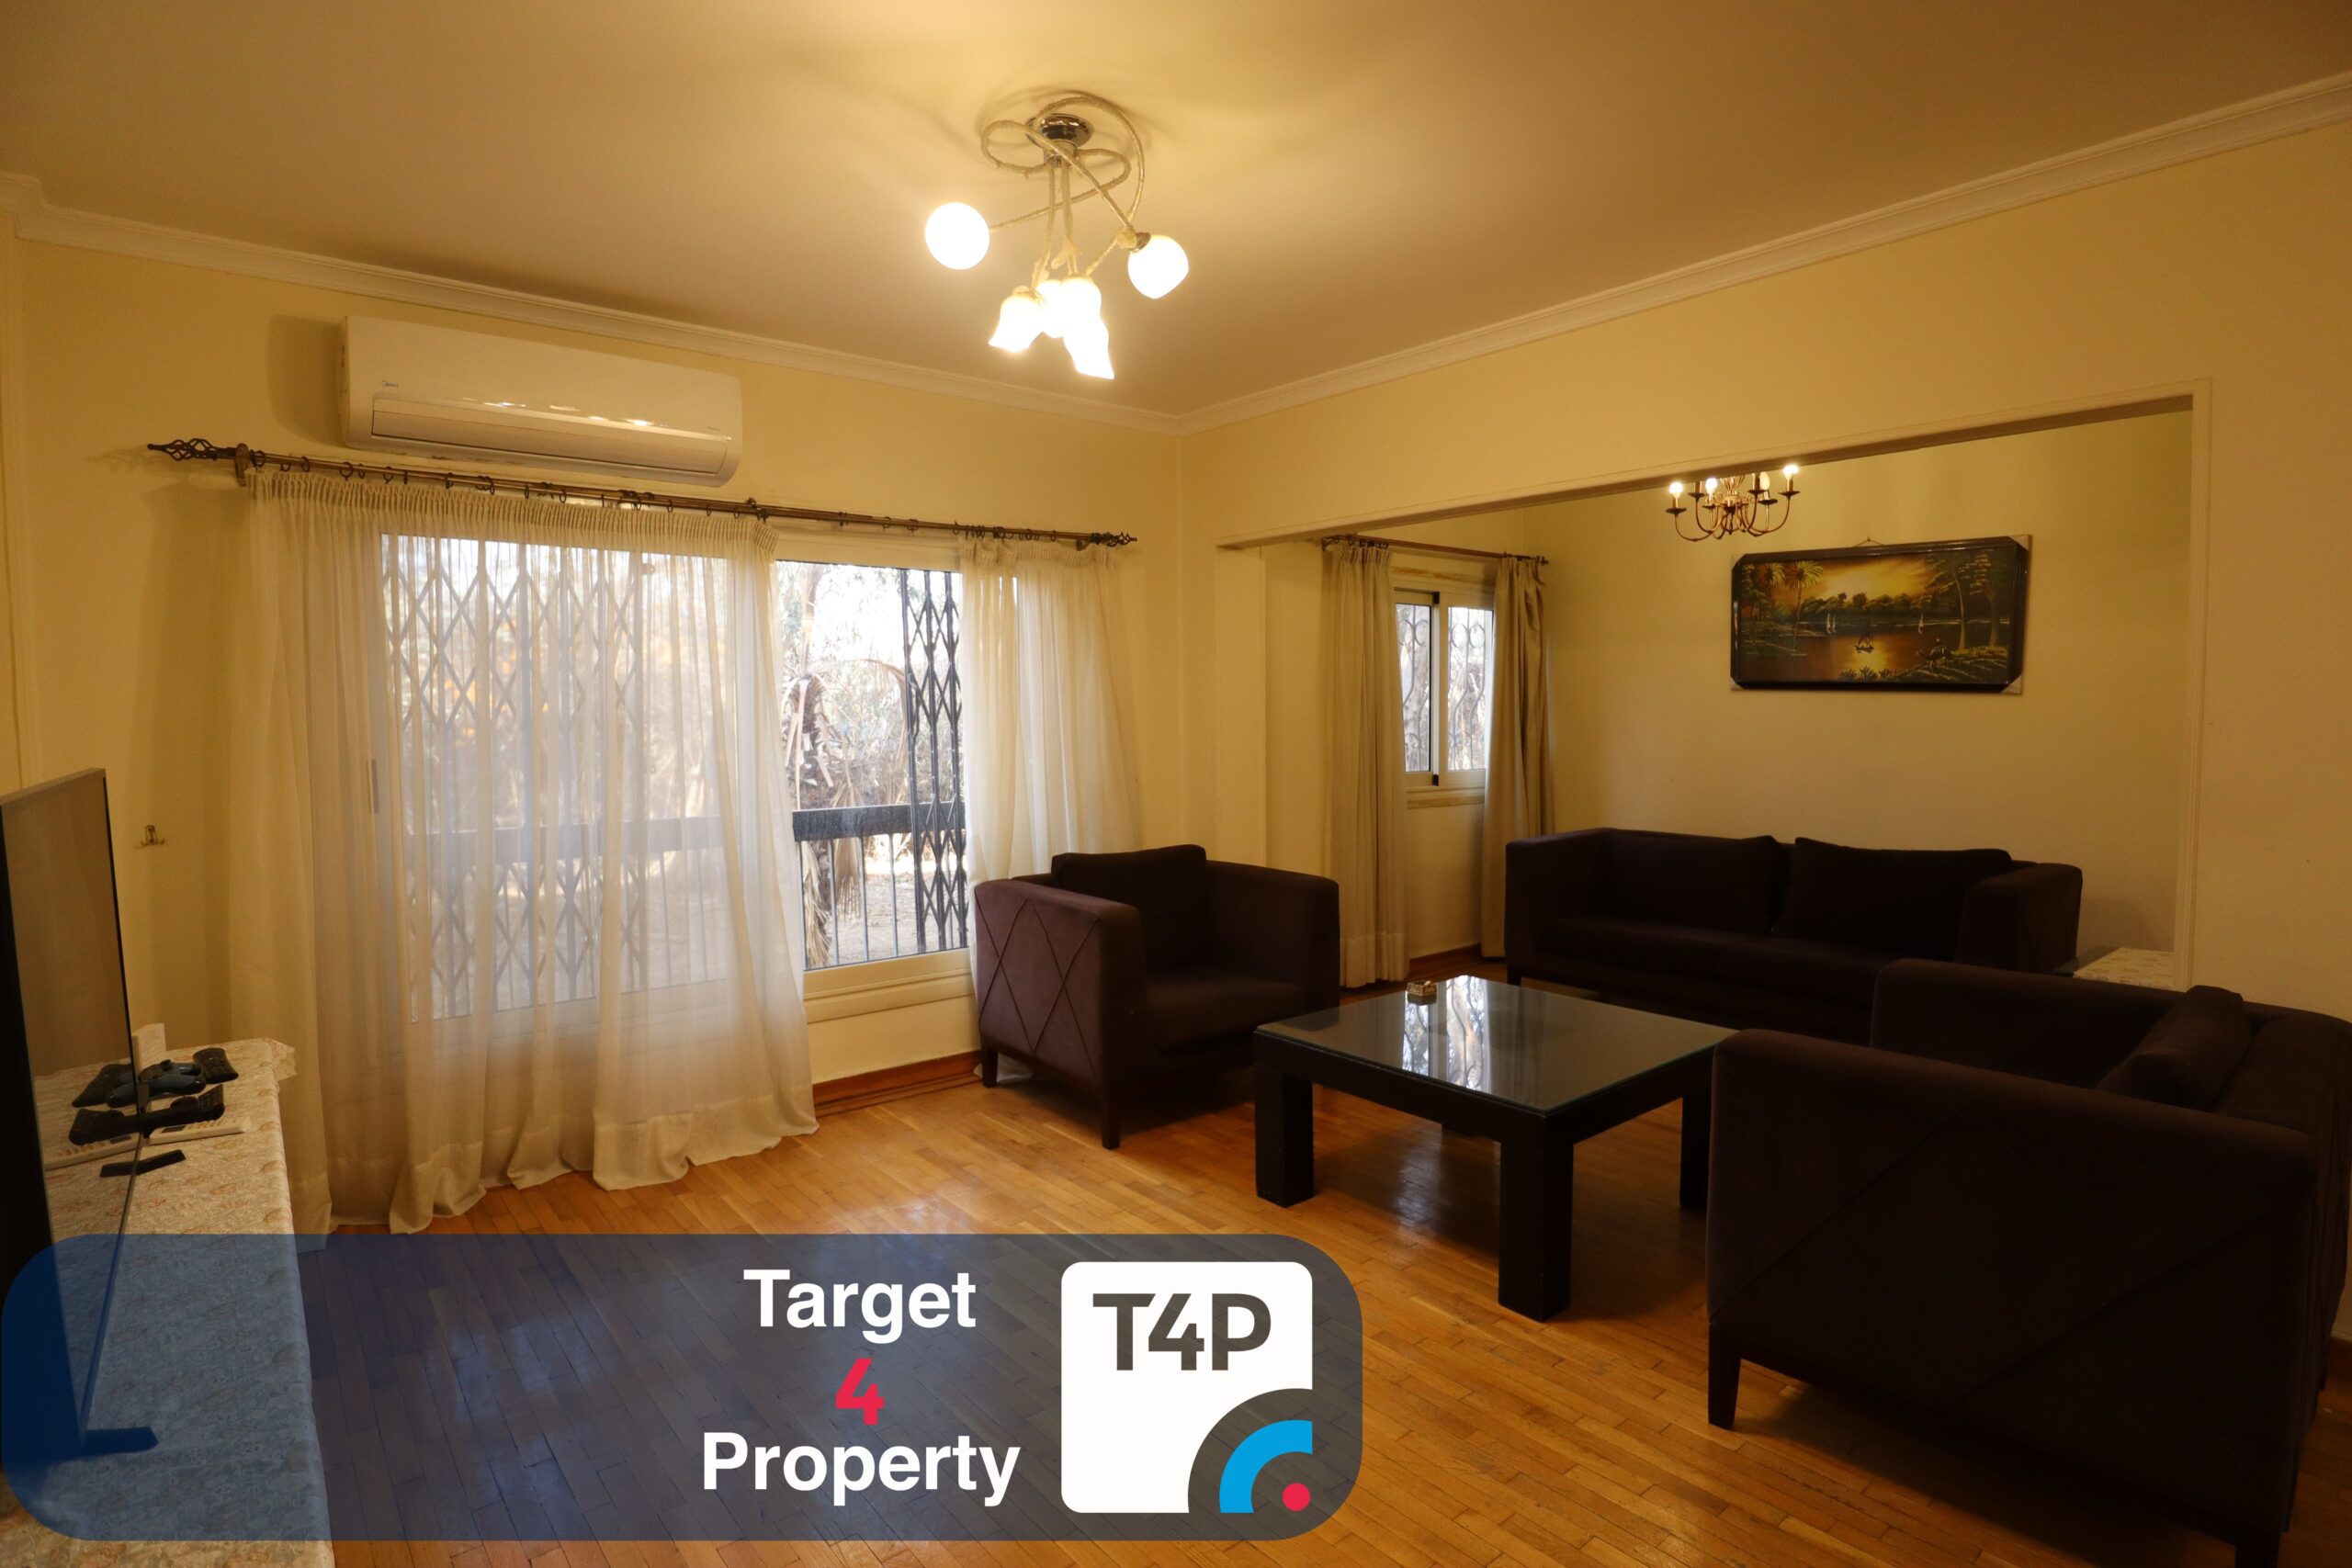 Fully Furnished Apartment For Rent In Maadi Degla.